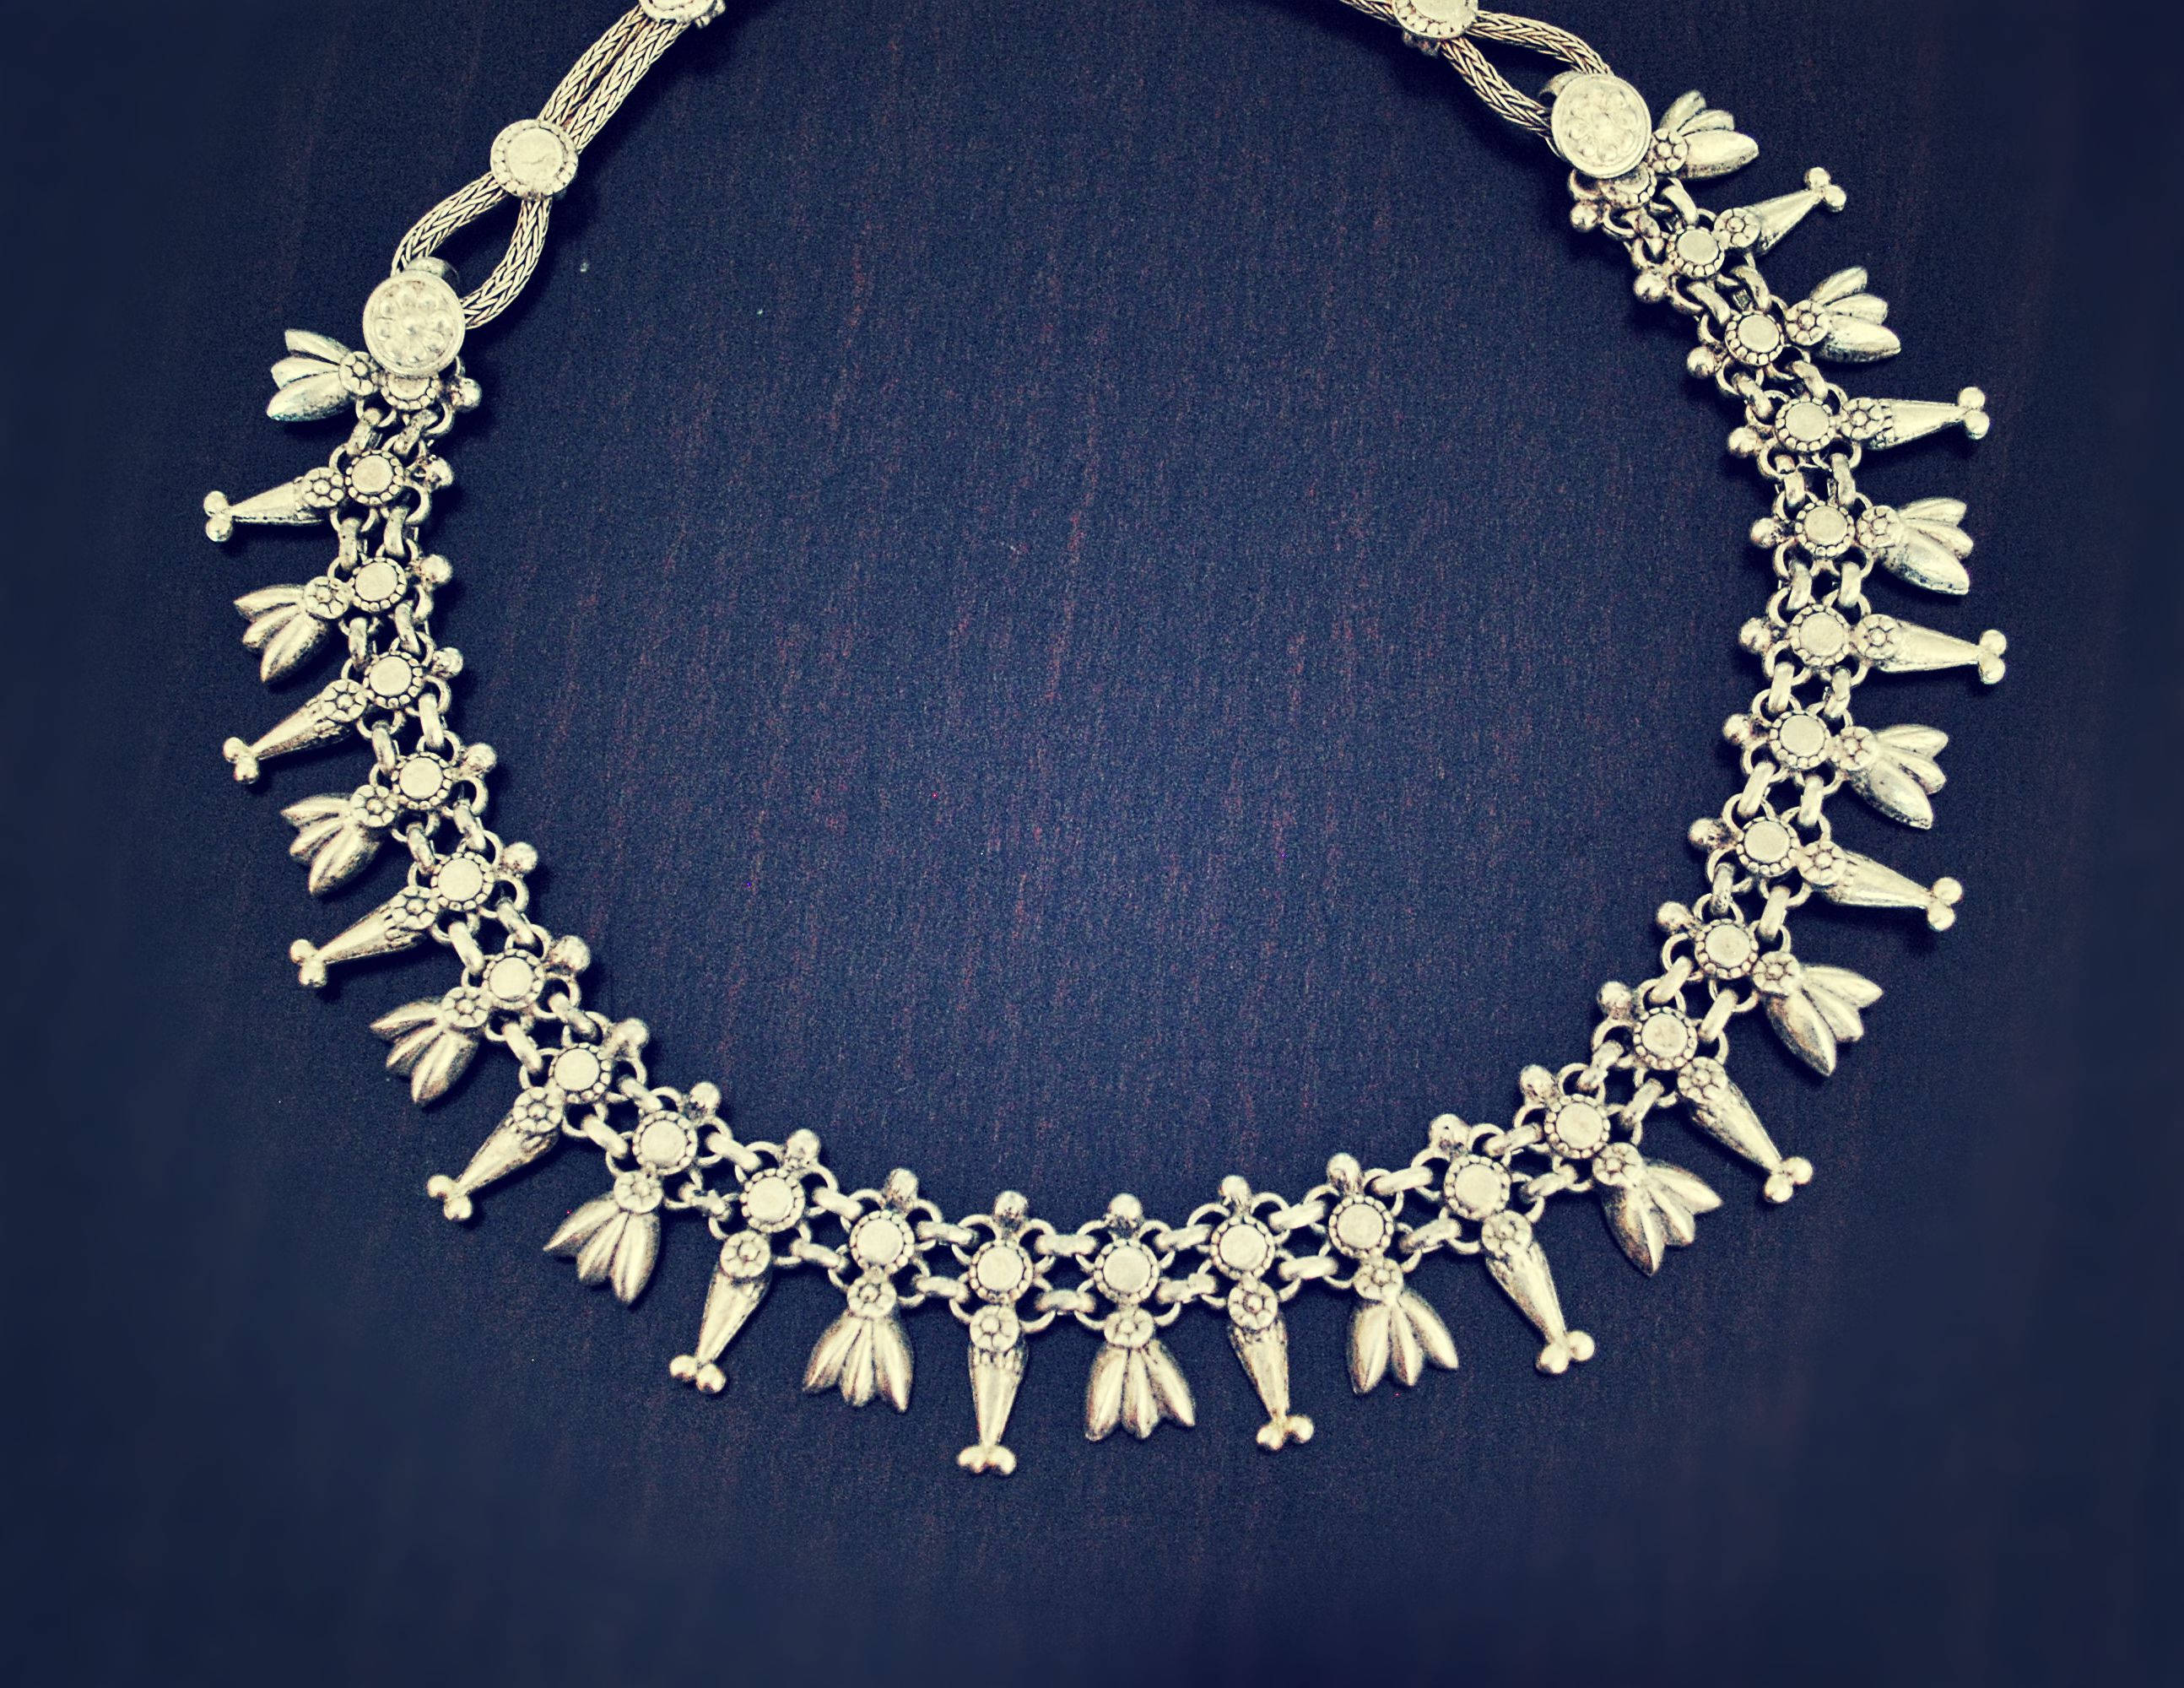 Rajasthan Silver Necklace - Vintage Indian Choker Necklace - Ethnic Tribal India Necklace - Rajasthan Jewelry - Rajasthan Necklace